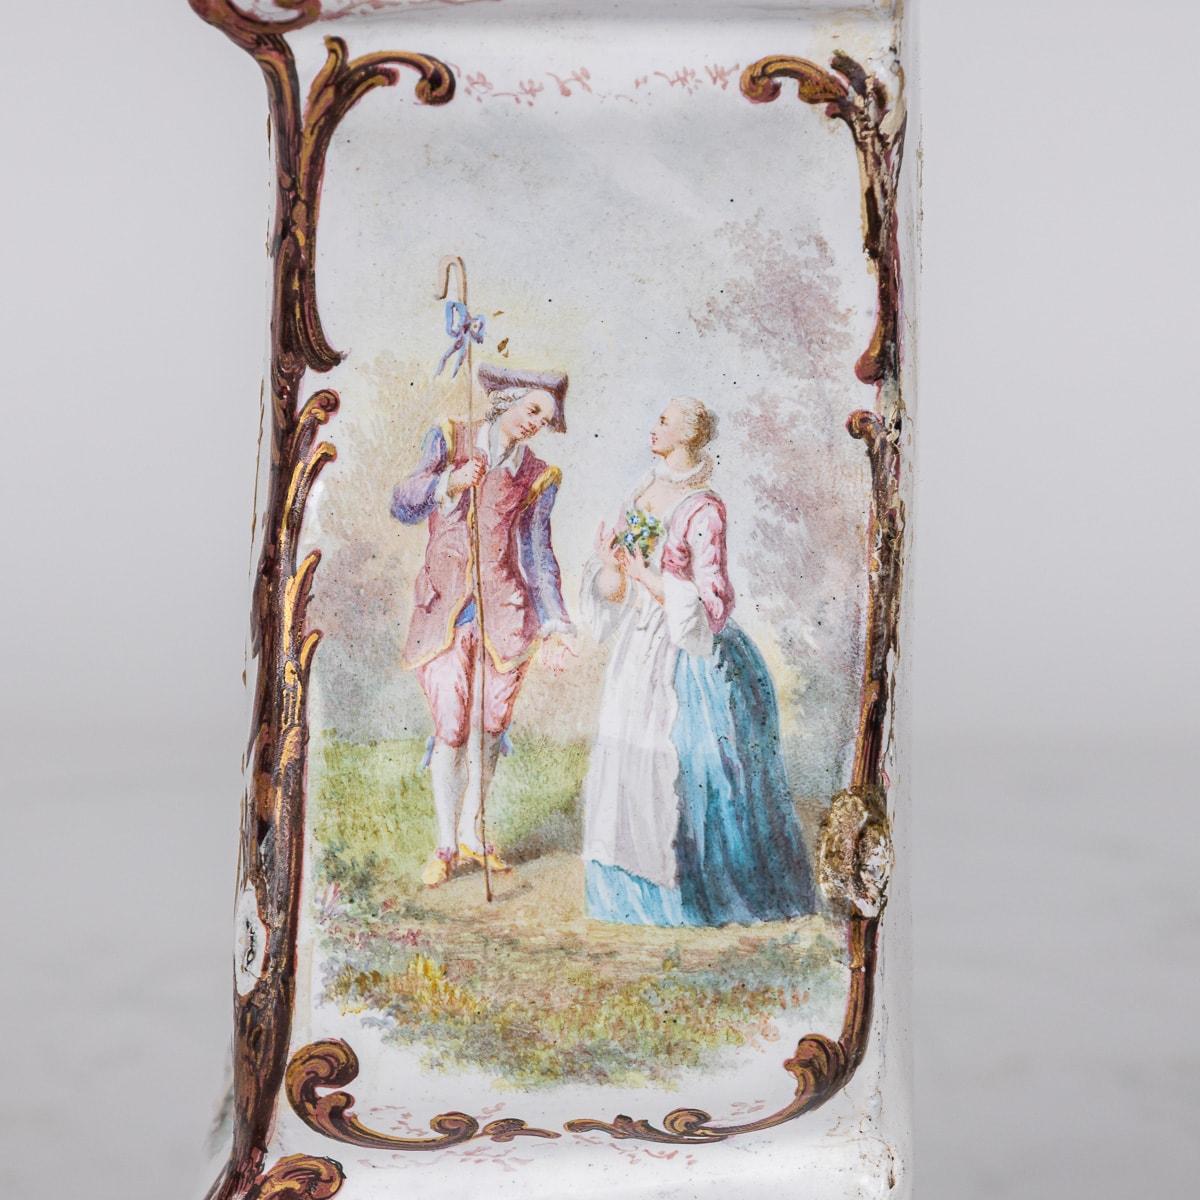 18th Century English Enamel Table Clock With Floral & Romantic Scenes c.1770 For Sale 10